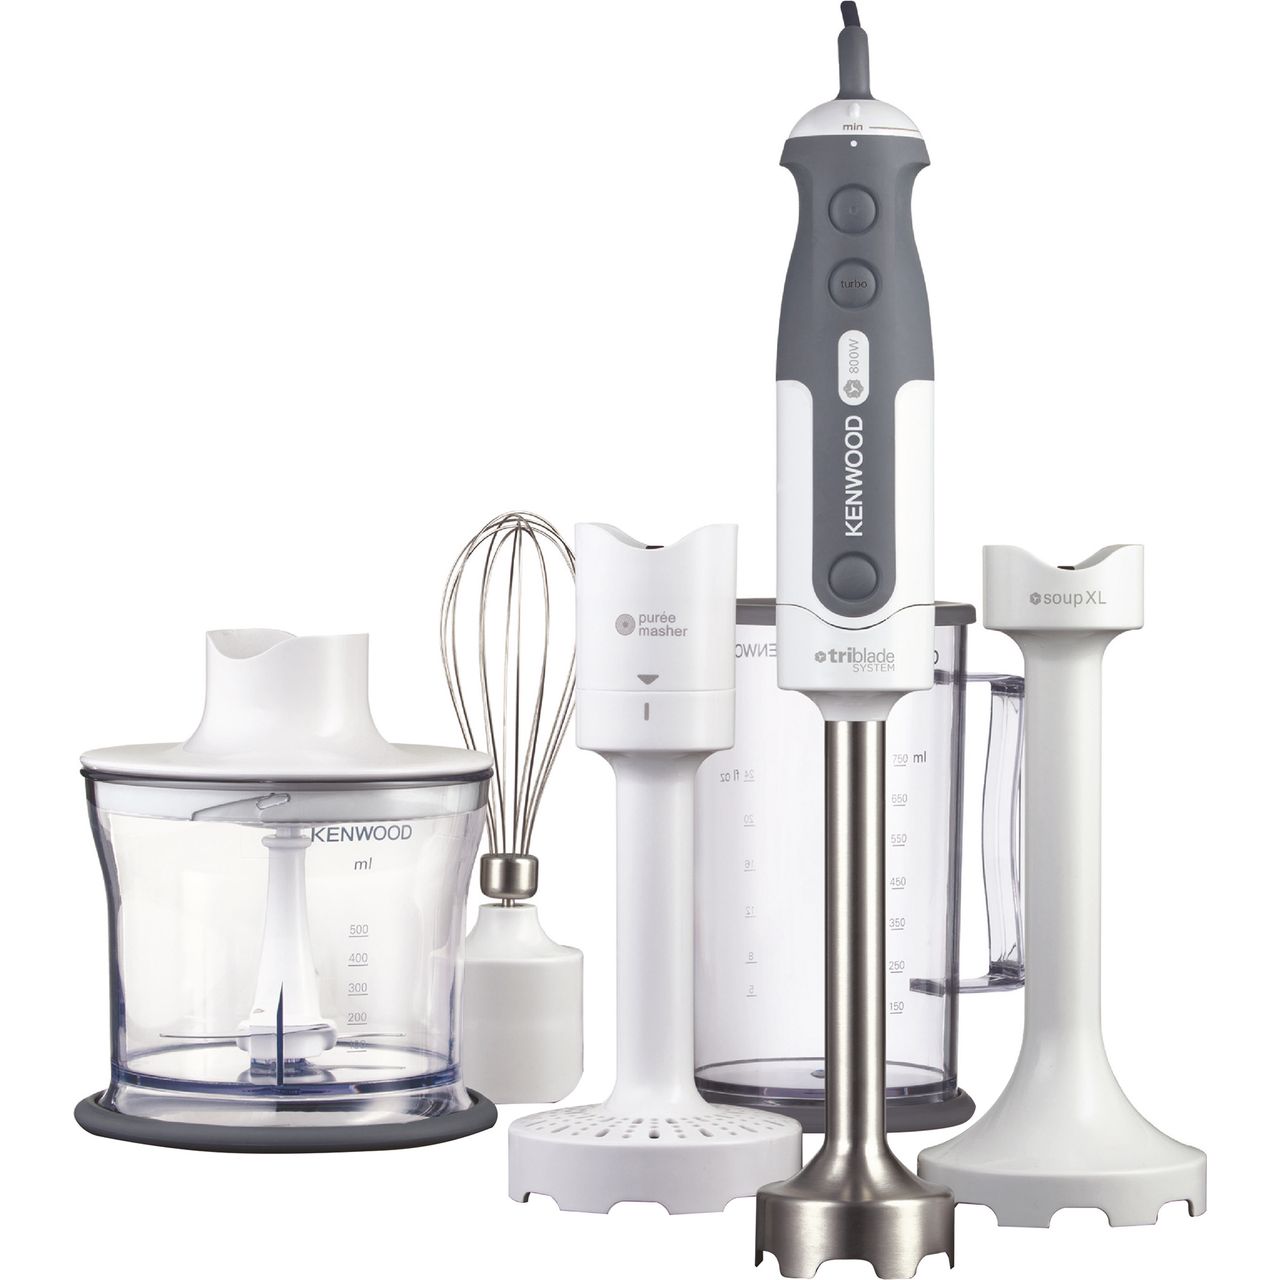 Kenwood HDP406 Hand Blender with 6 Accessories Review